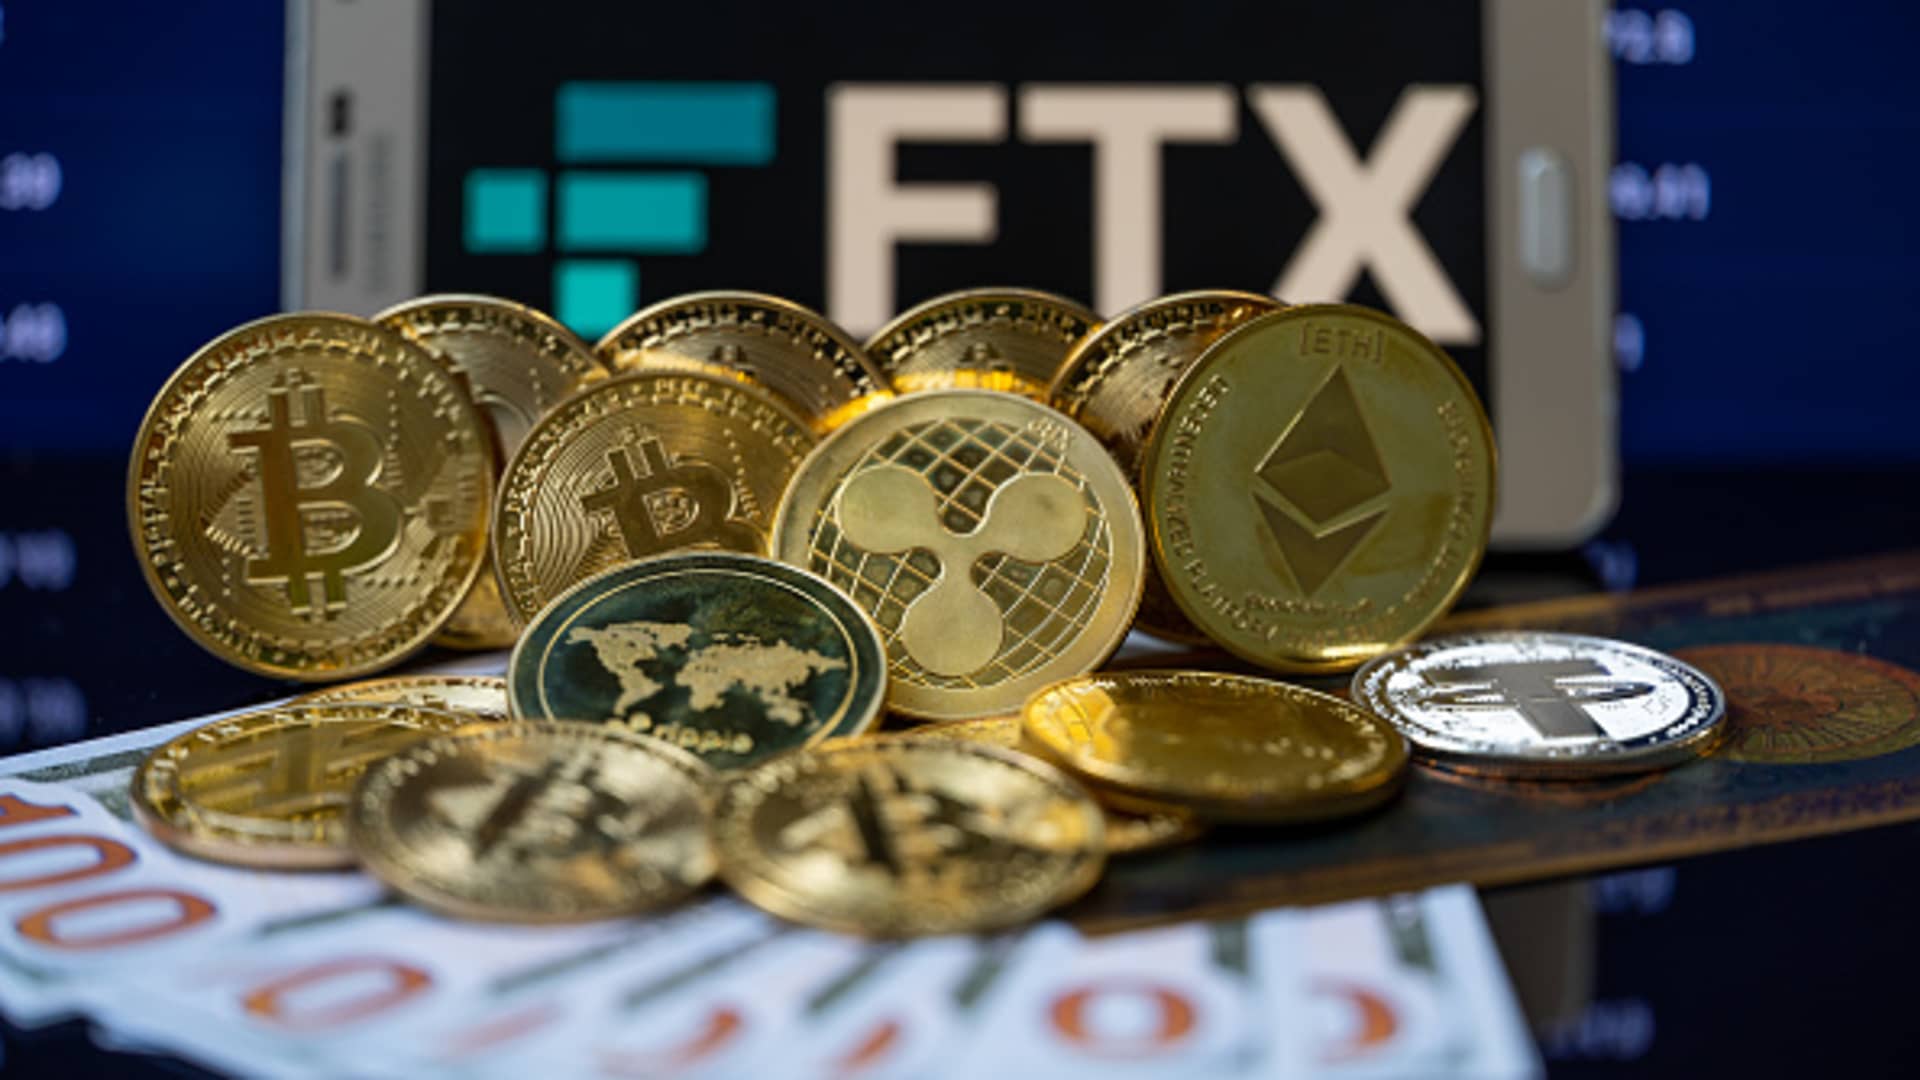 Sen. Sherrod Brown calls on Treasury Secretary Janet Yellen to help rein in cryptocurrency firms after FTX collapse